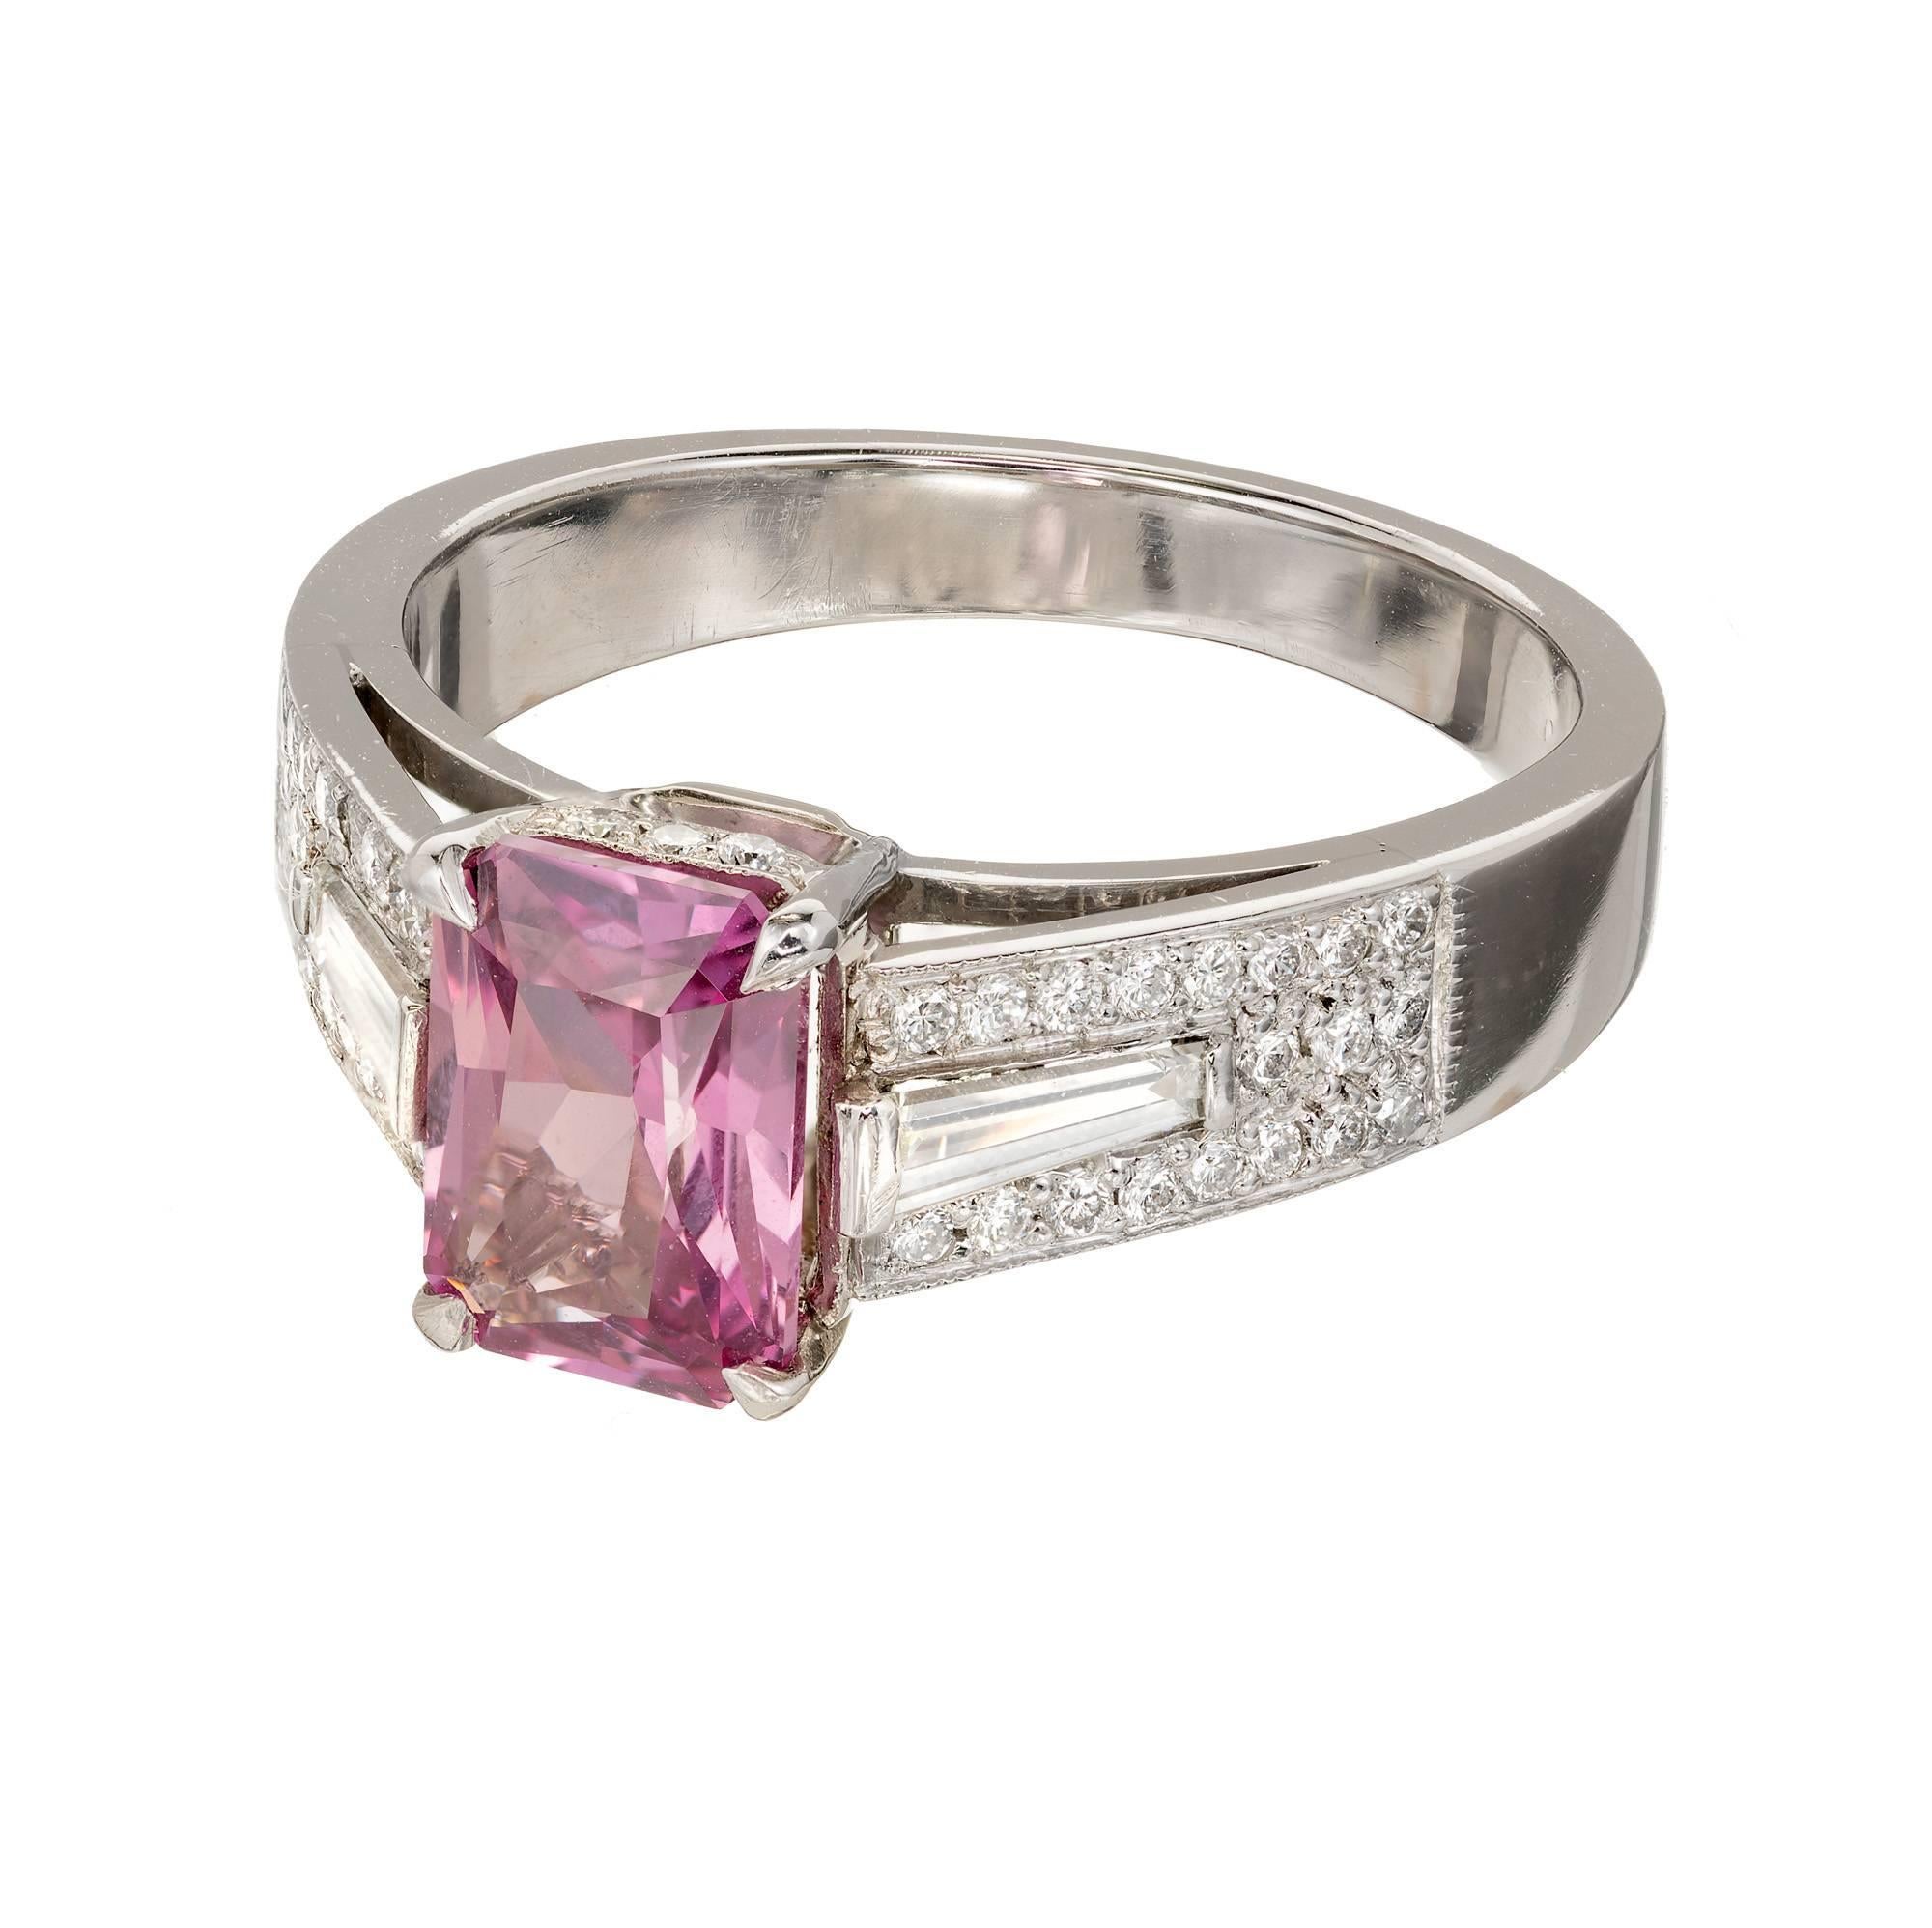 Peter Suchy vintage inspired purple pink octagonal sapphire and diamond engagement ring.  GIA Certified natural no heat or no enhancements. Bright and sparkly. Pink with a purple overtone.

1 Octagonal Sapphire purplish pink SI approximate 2.06